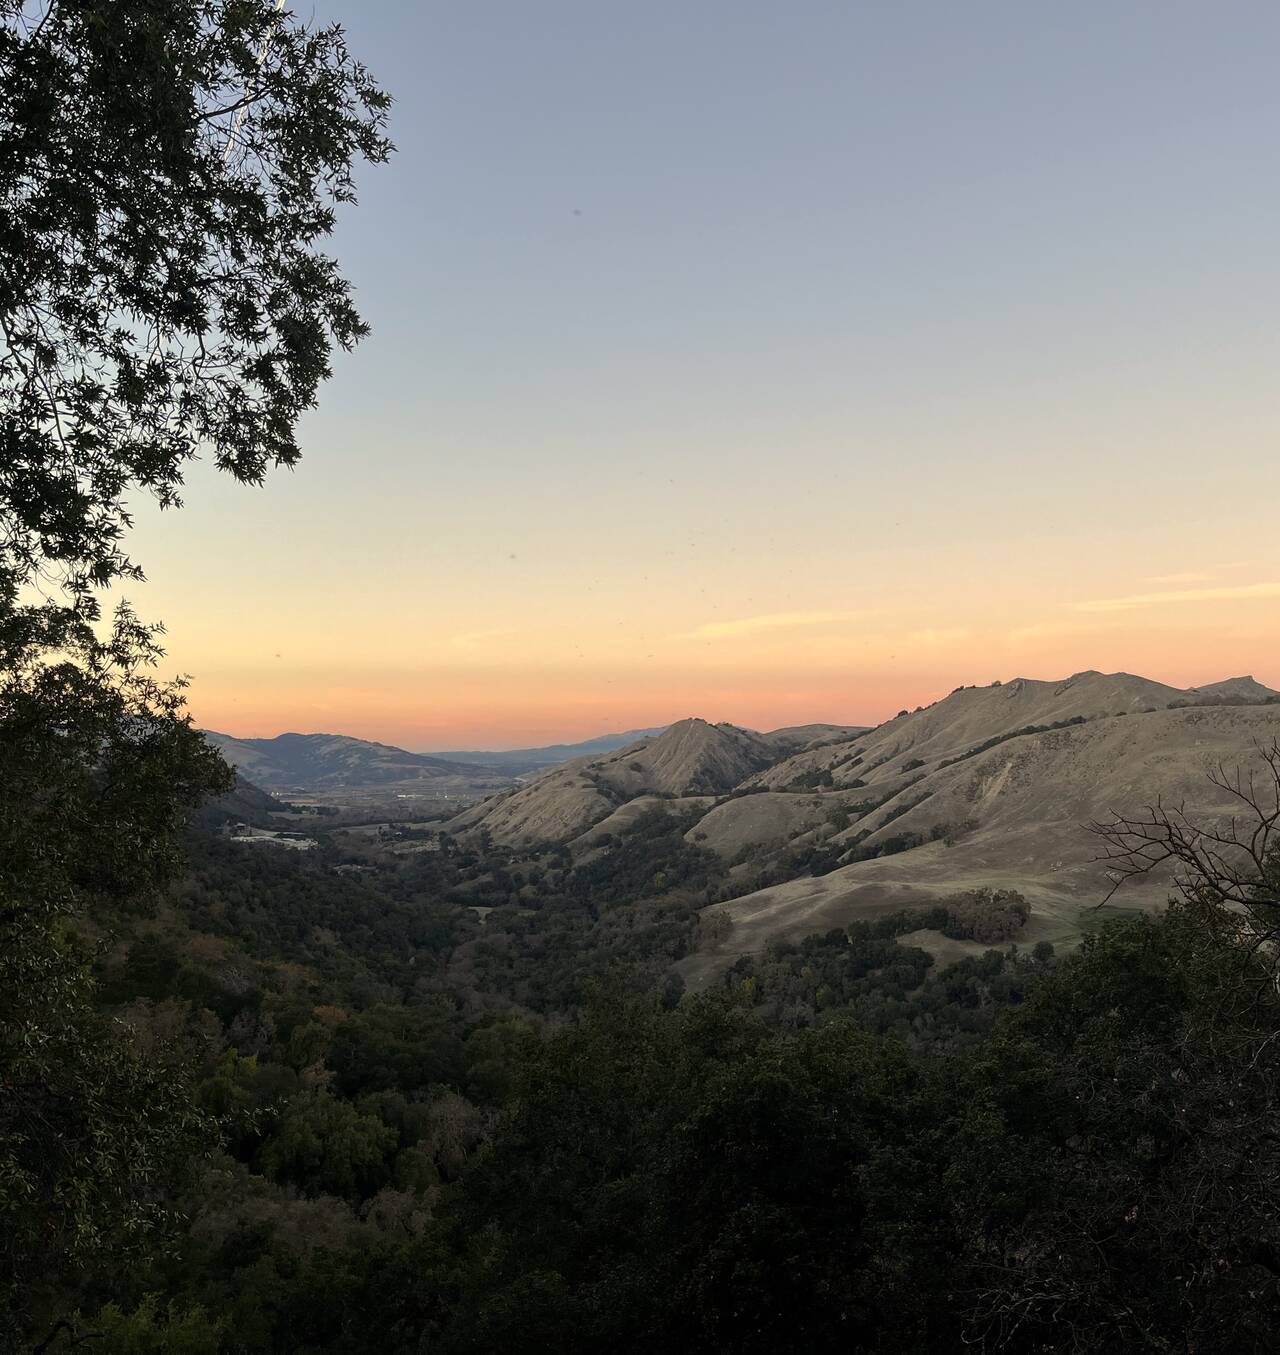 Looking out toward Pleasanton, the setting sun casts a warm glow on the shadowed hills